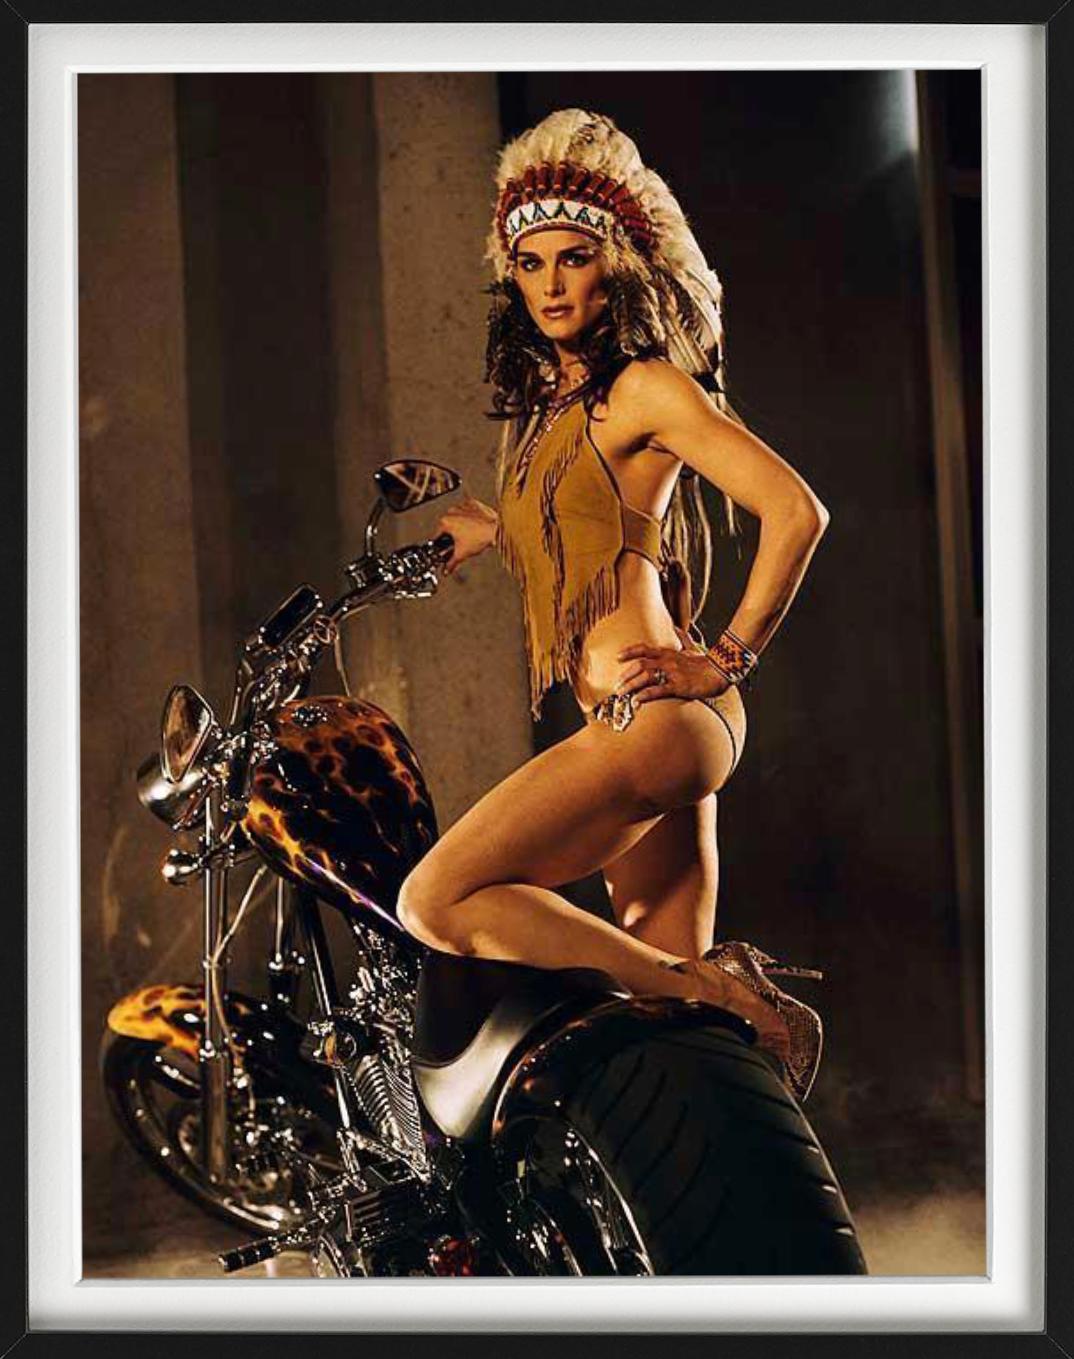 'Brooke Shields, LA' - native look with motorcycle, fine art photography, 2005 - Photograph by Sante D´ Orazio